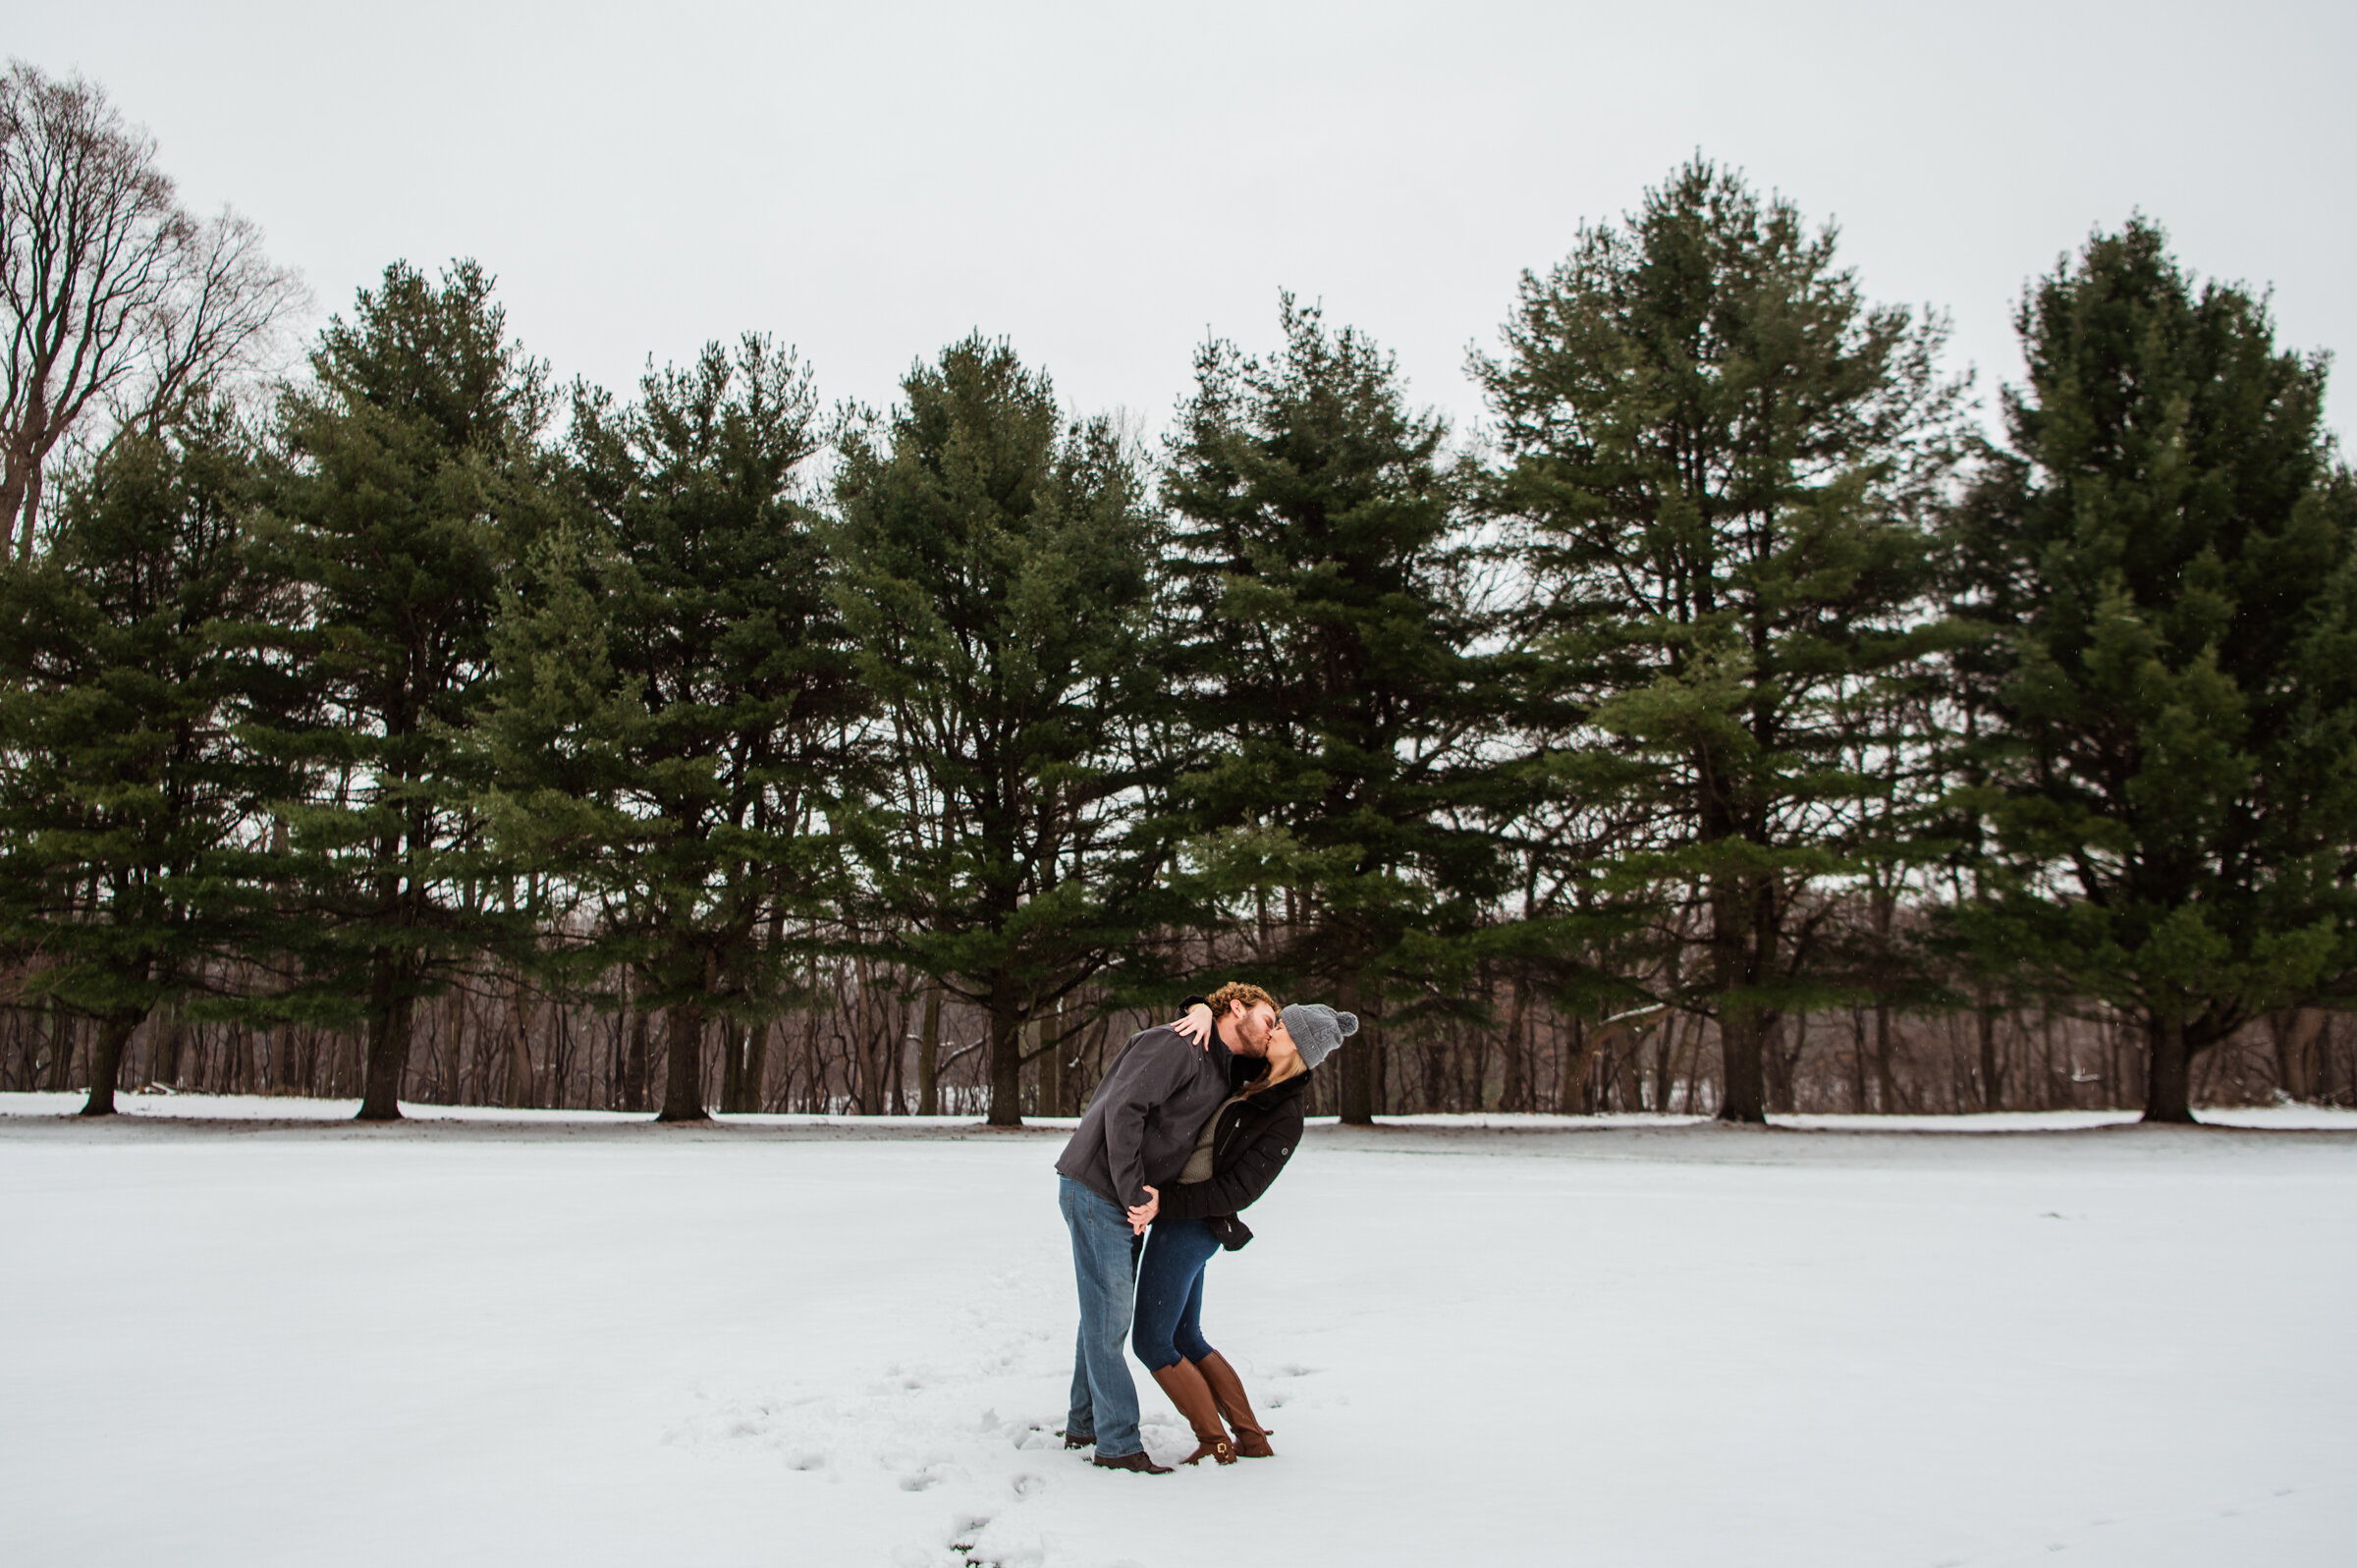 Irondequoit_Beer_Company_Durand_Eastman_Park_Rochester_Engagement_Session_JILL_STUDIO_Rochester_NY_Photographer_7307.jpg